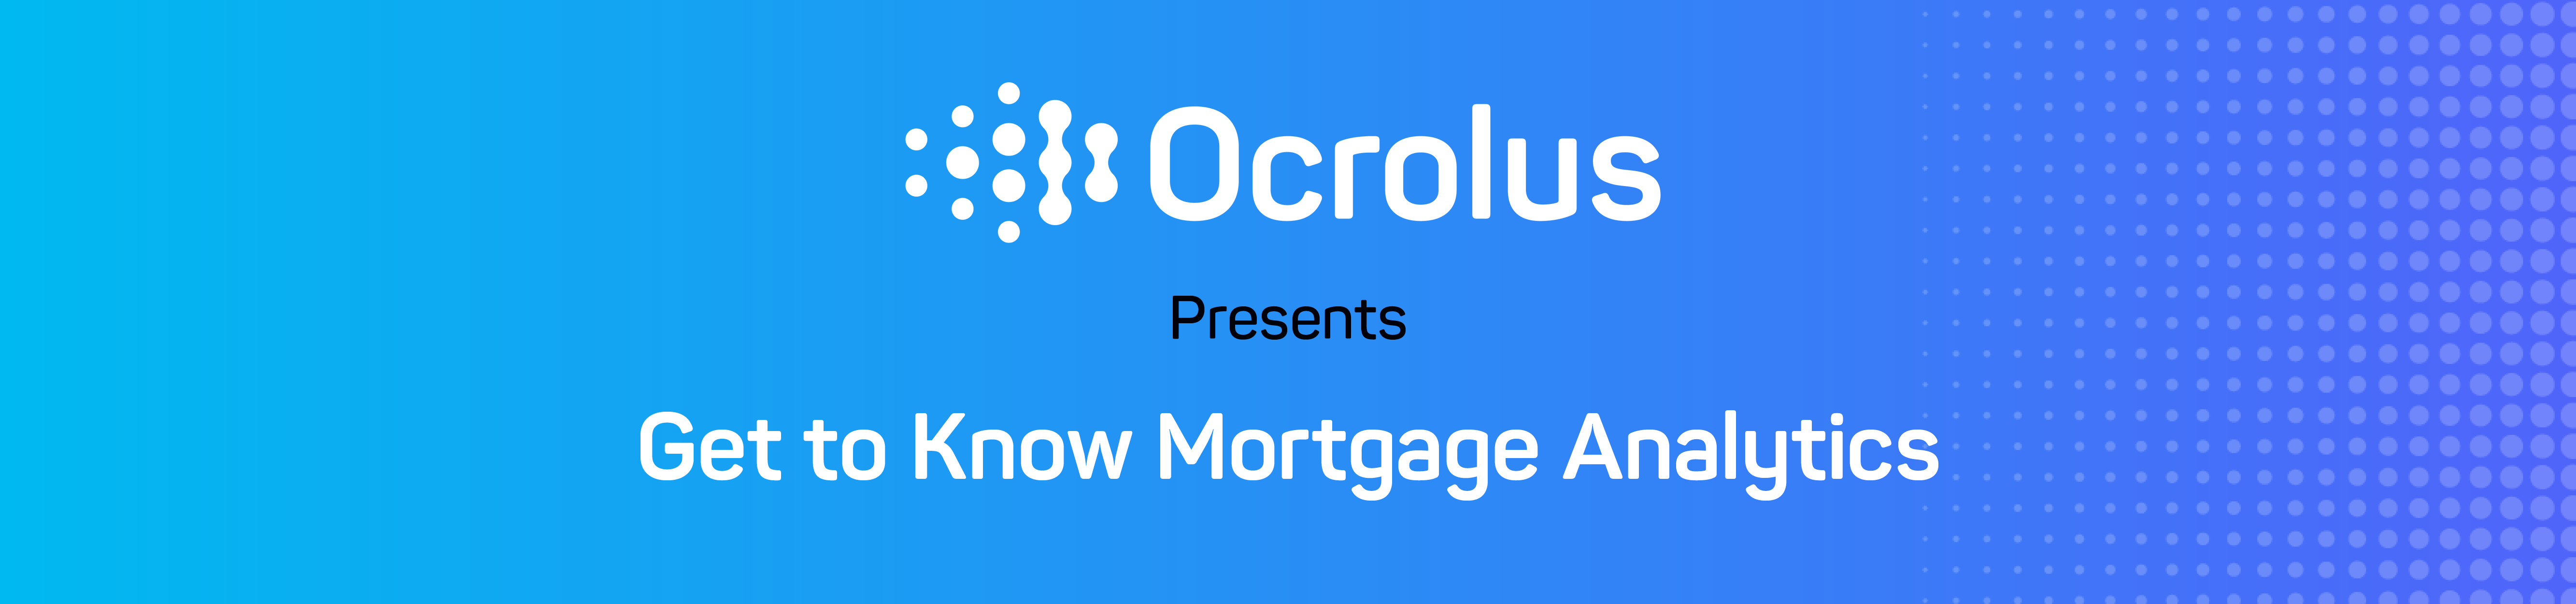 Get_to_Know_Mortgage_Analytics_Zoom_Banner.png